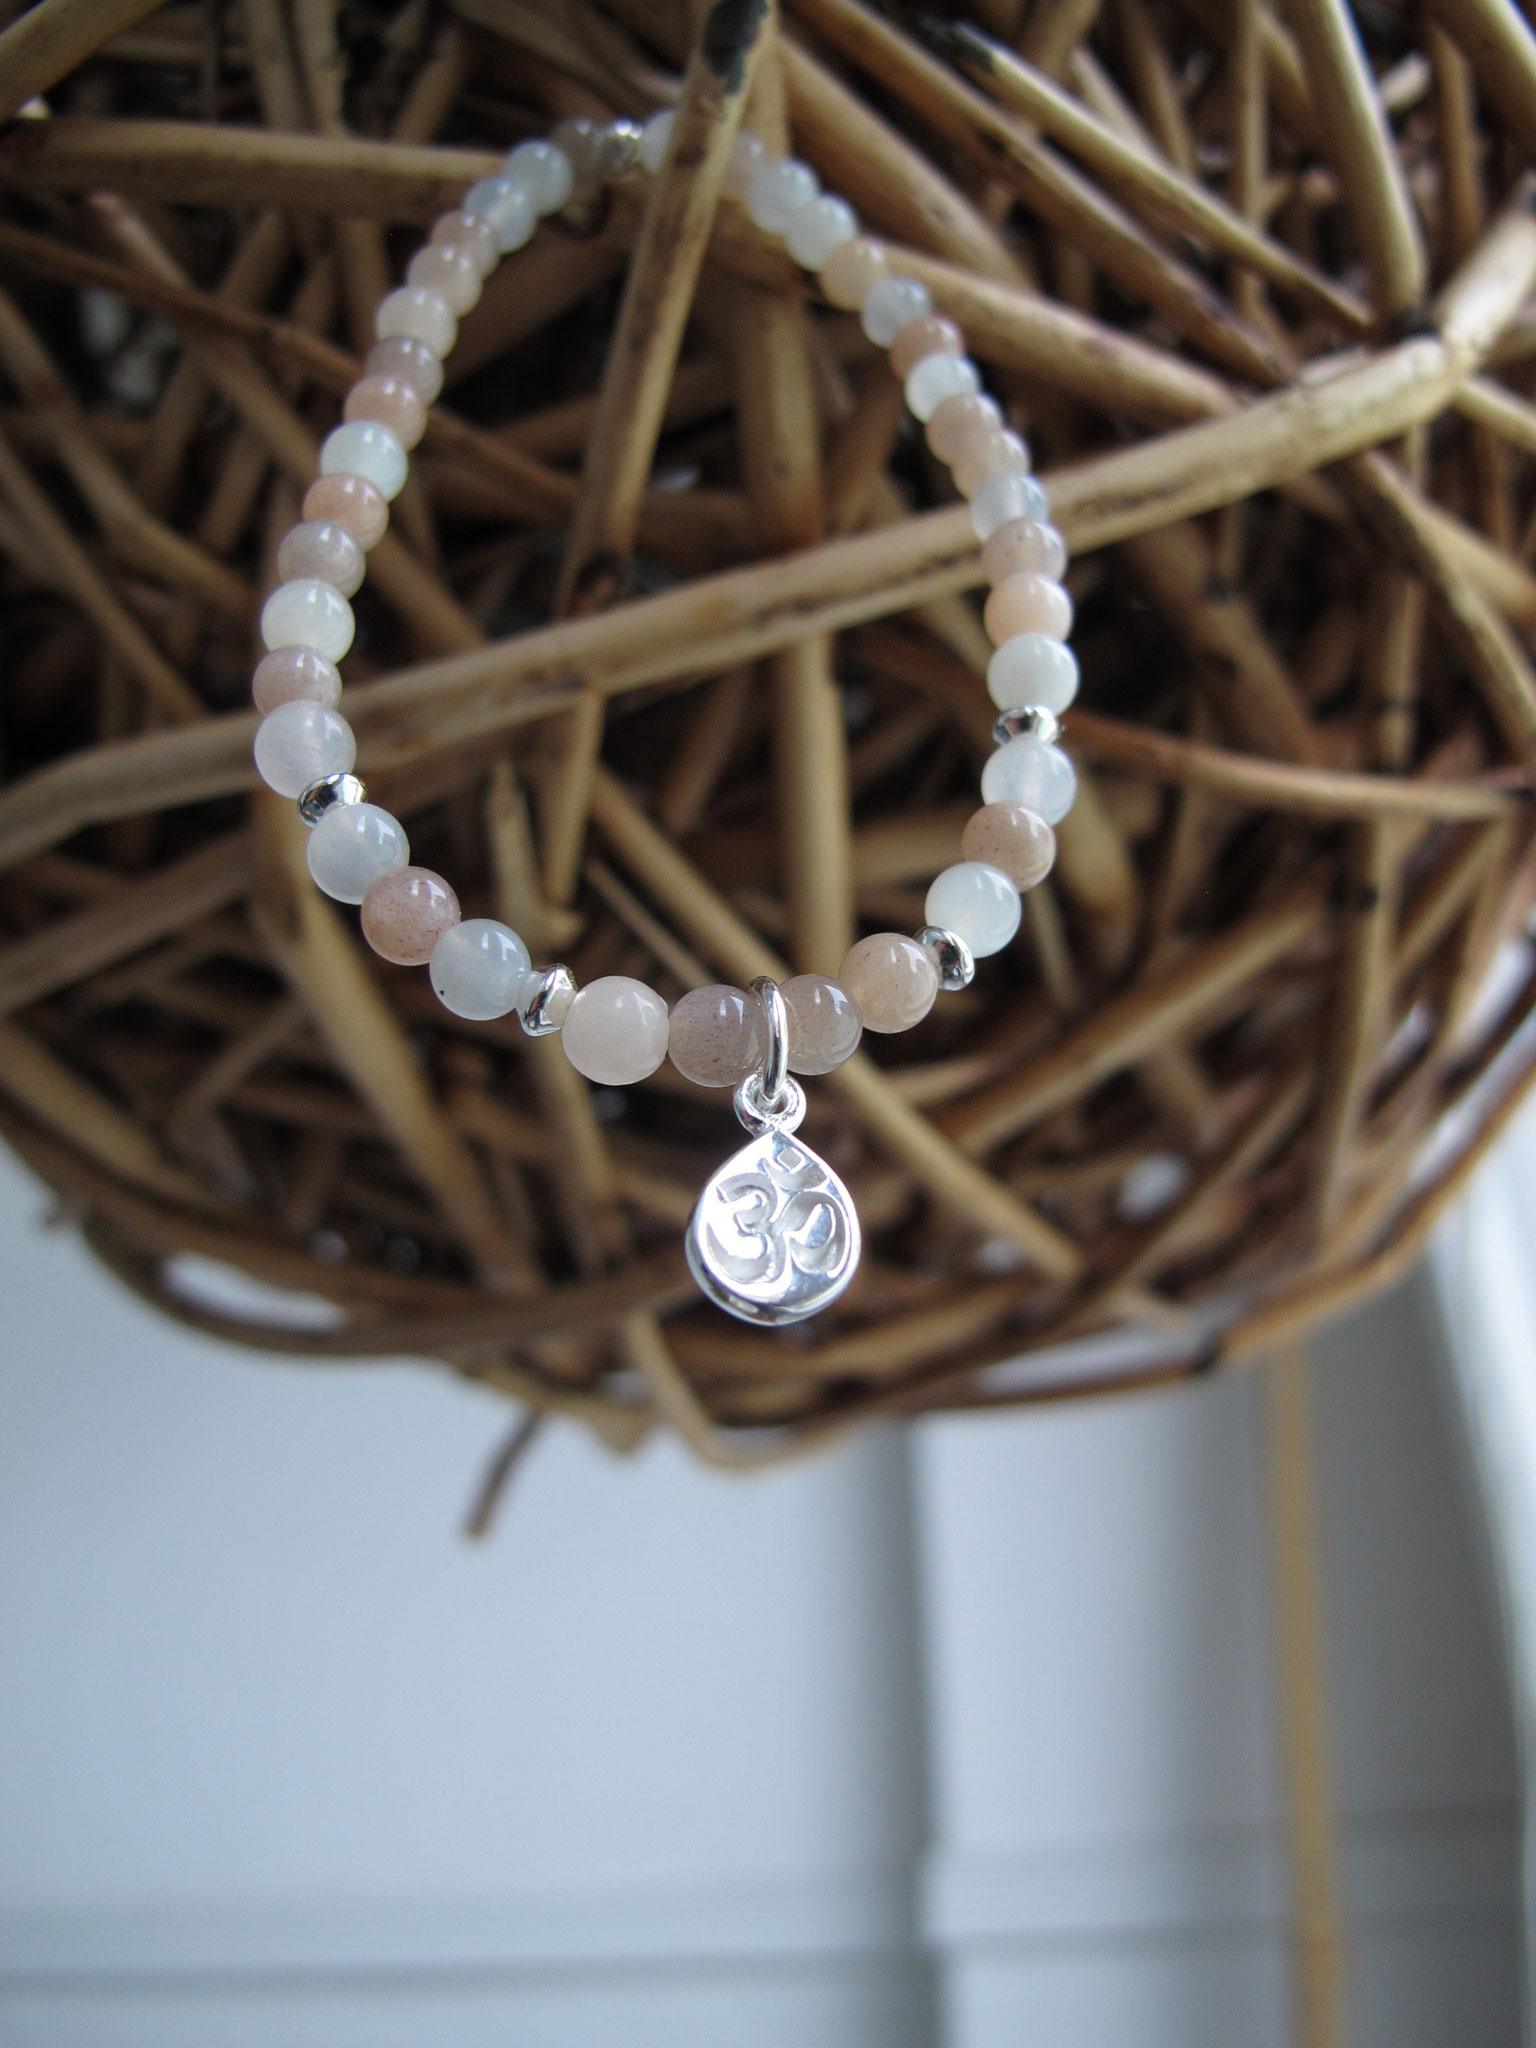 Multi-coloured moonstone with 925 Sterling Silver "OM" charm